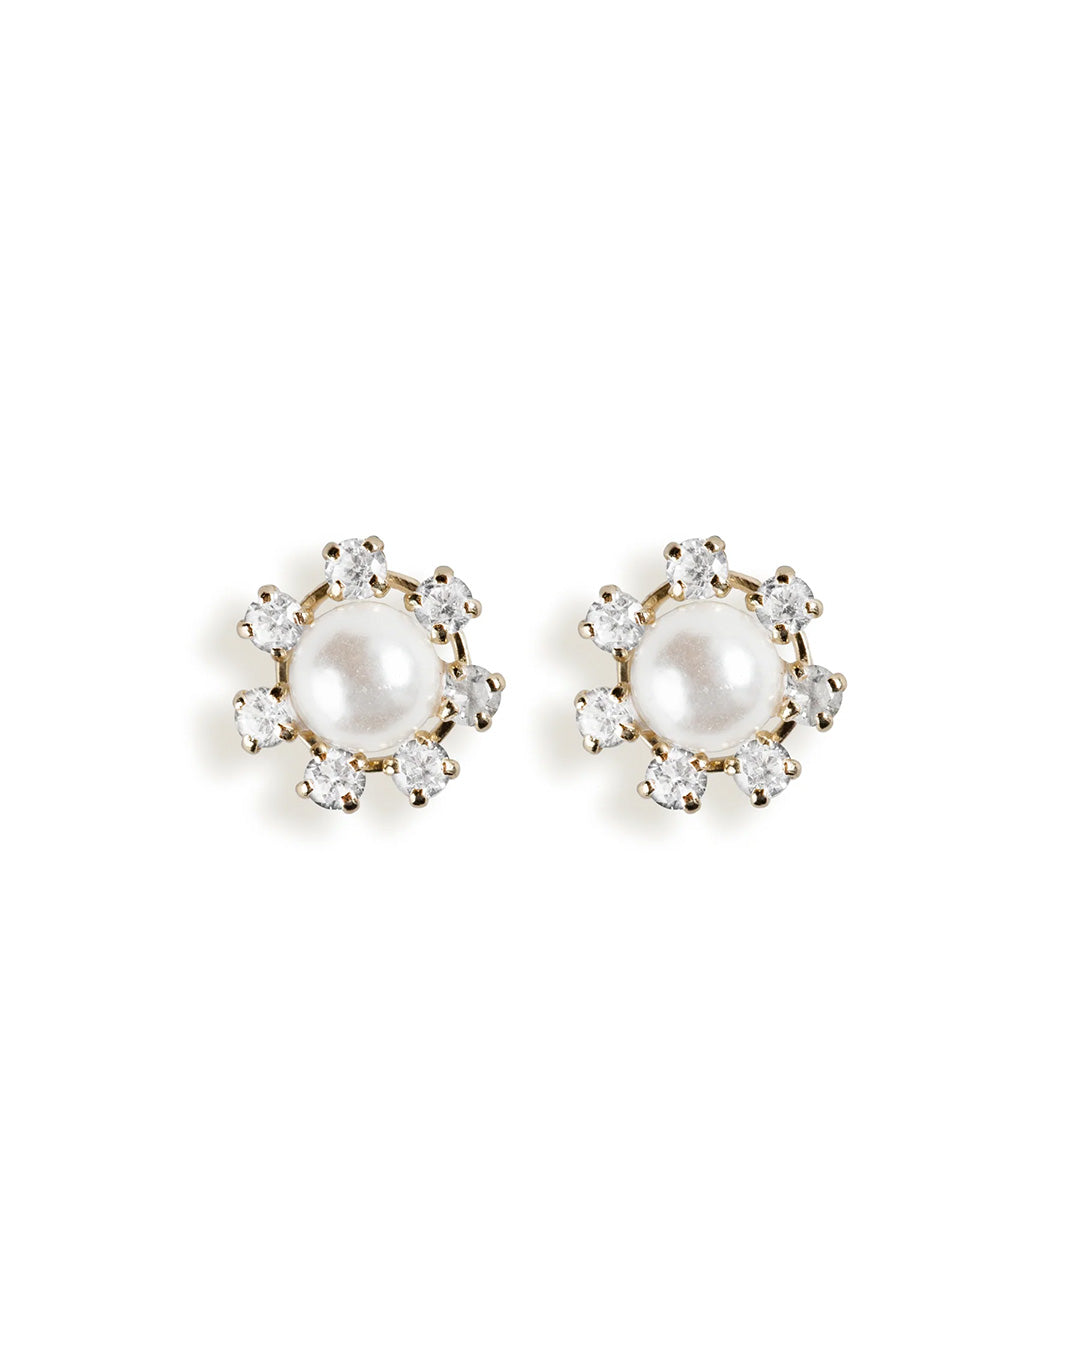 14K FLOWER EARRINGS WITH PEARL AND CRYSTALS